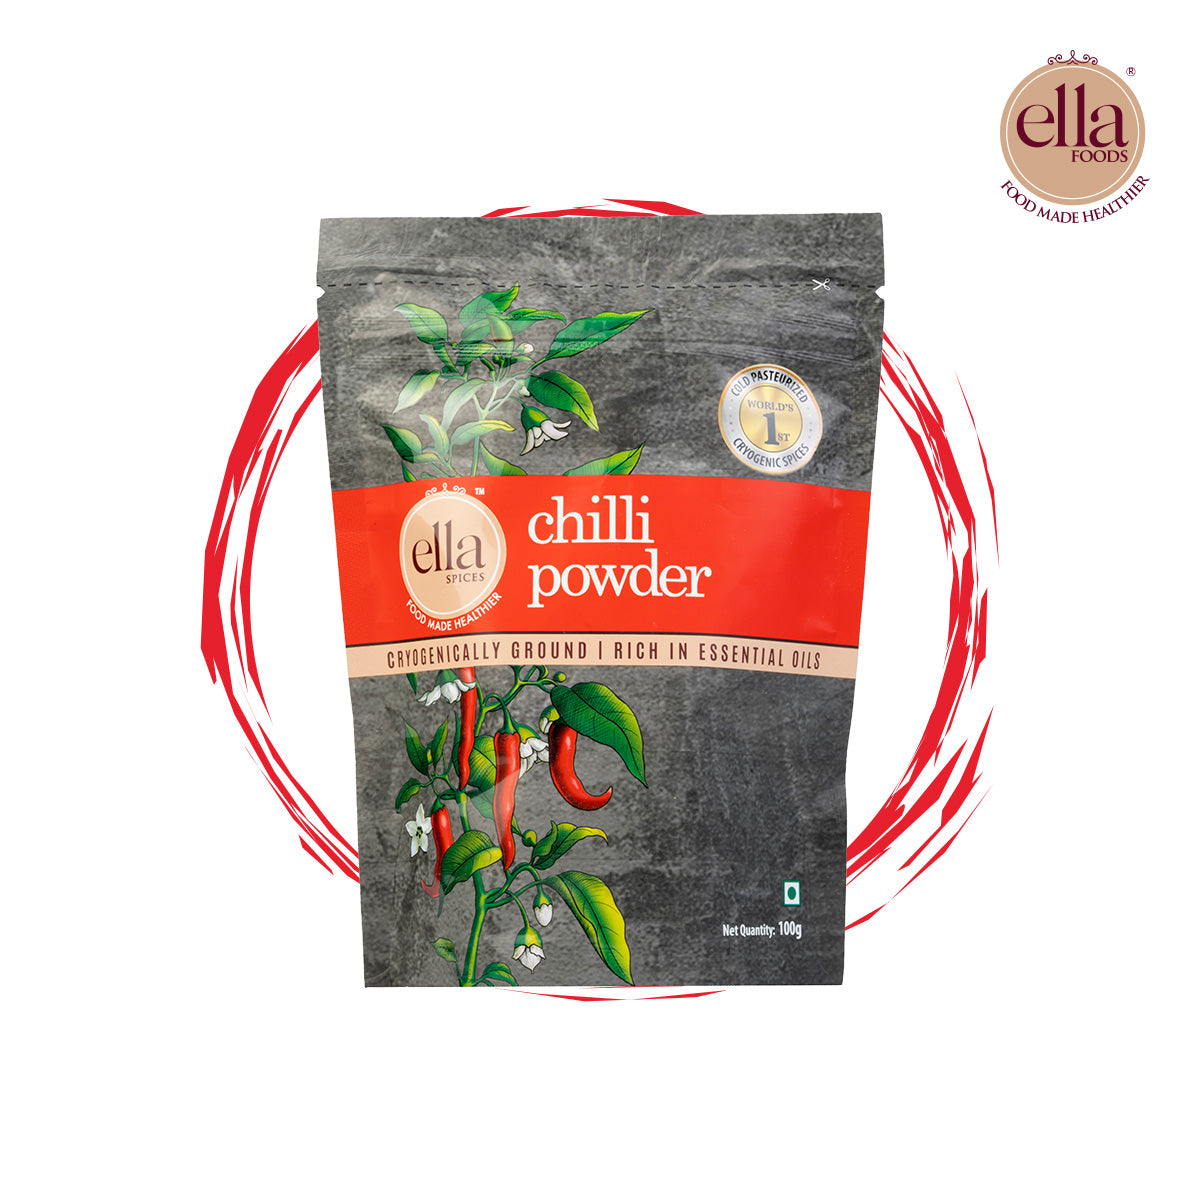 Chilli Powder - Pack of 4 - 100g Each